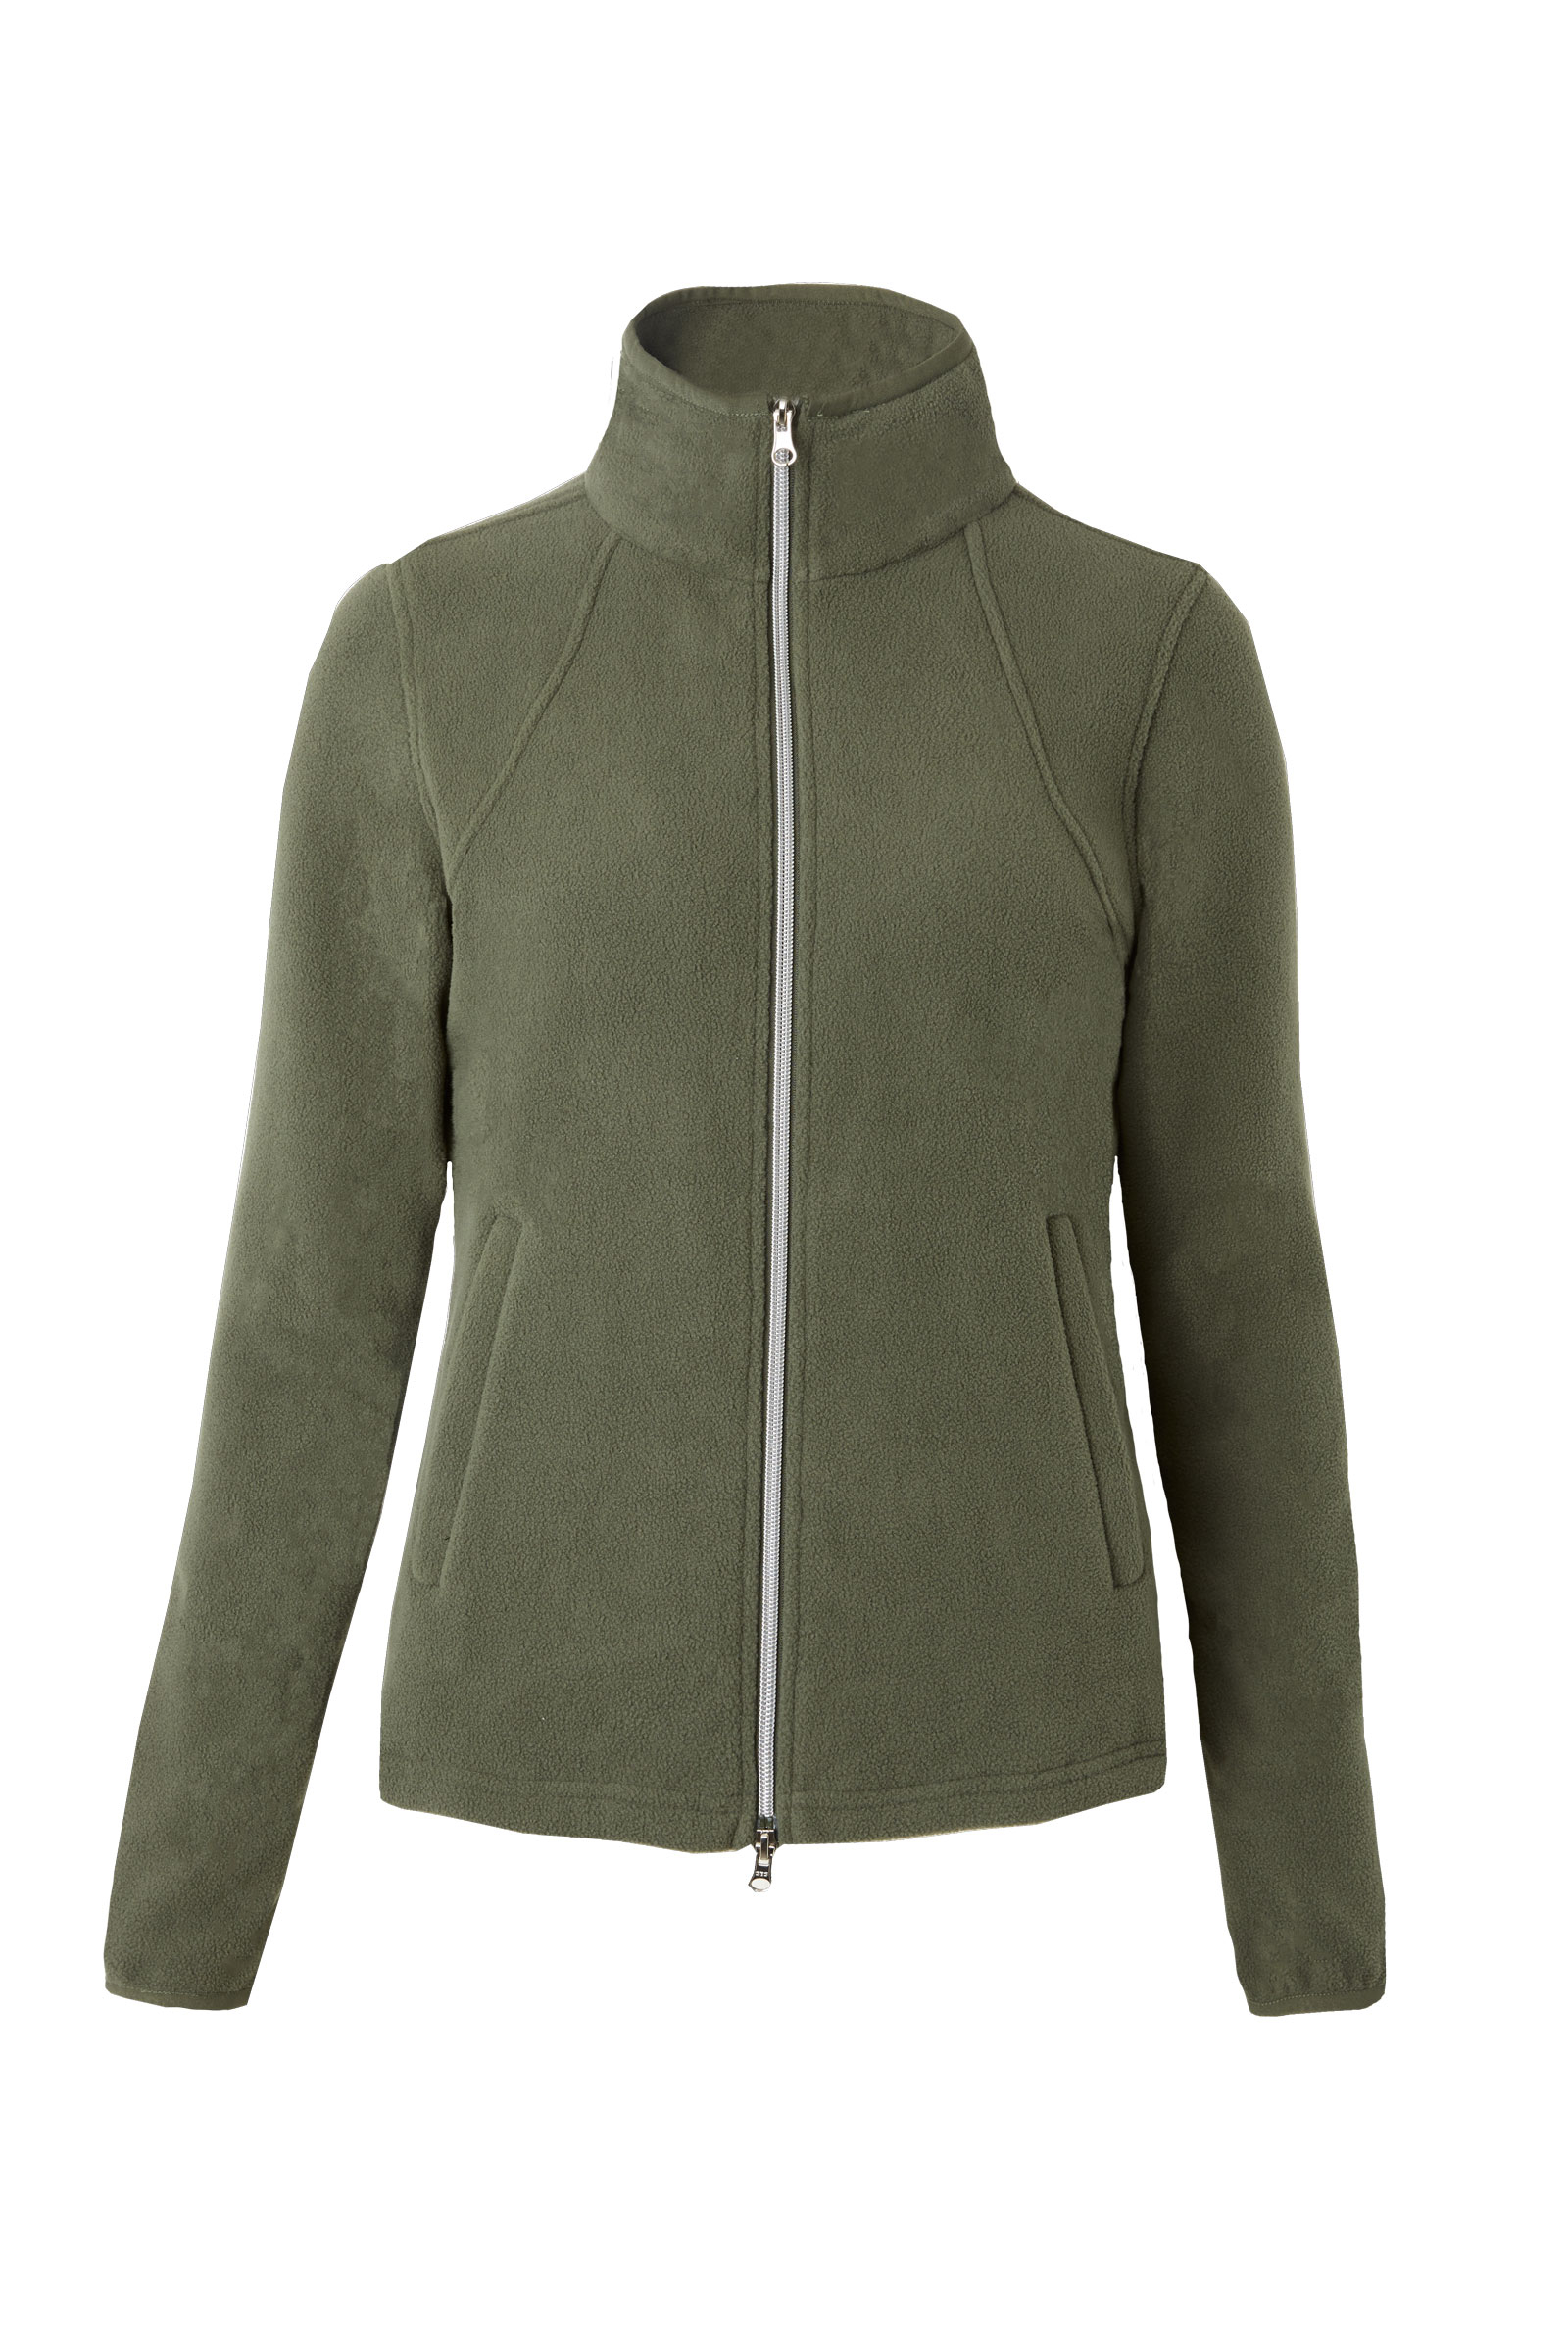 Women's Country Clothing Jumpers & Fleeces – GS Equestrian